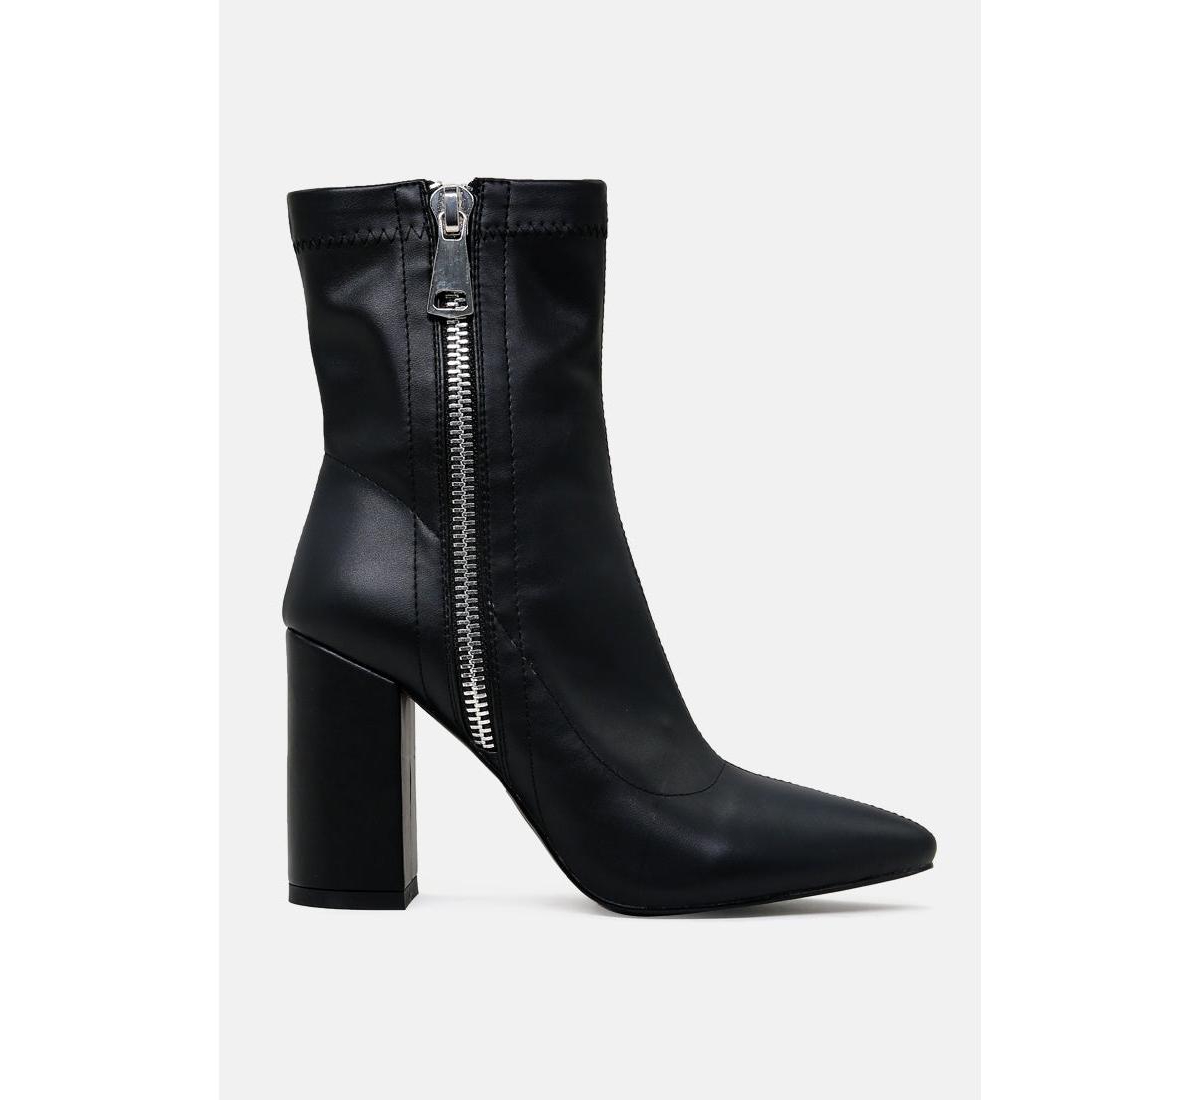 Valeria pointed toe high ankle boots with side zipper - Black